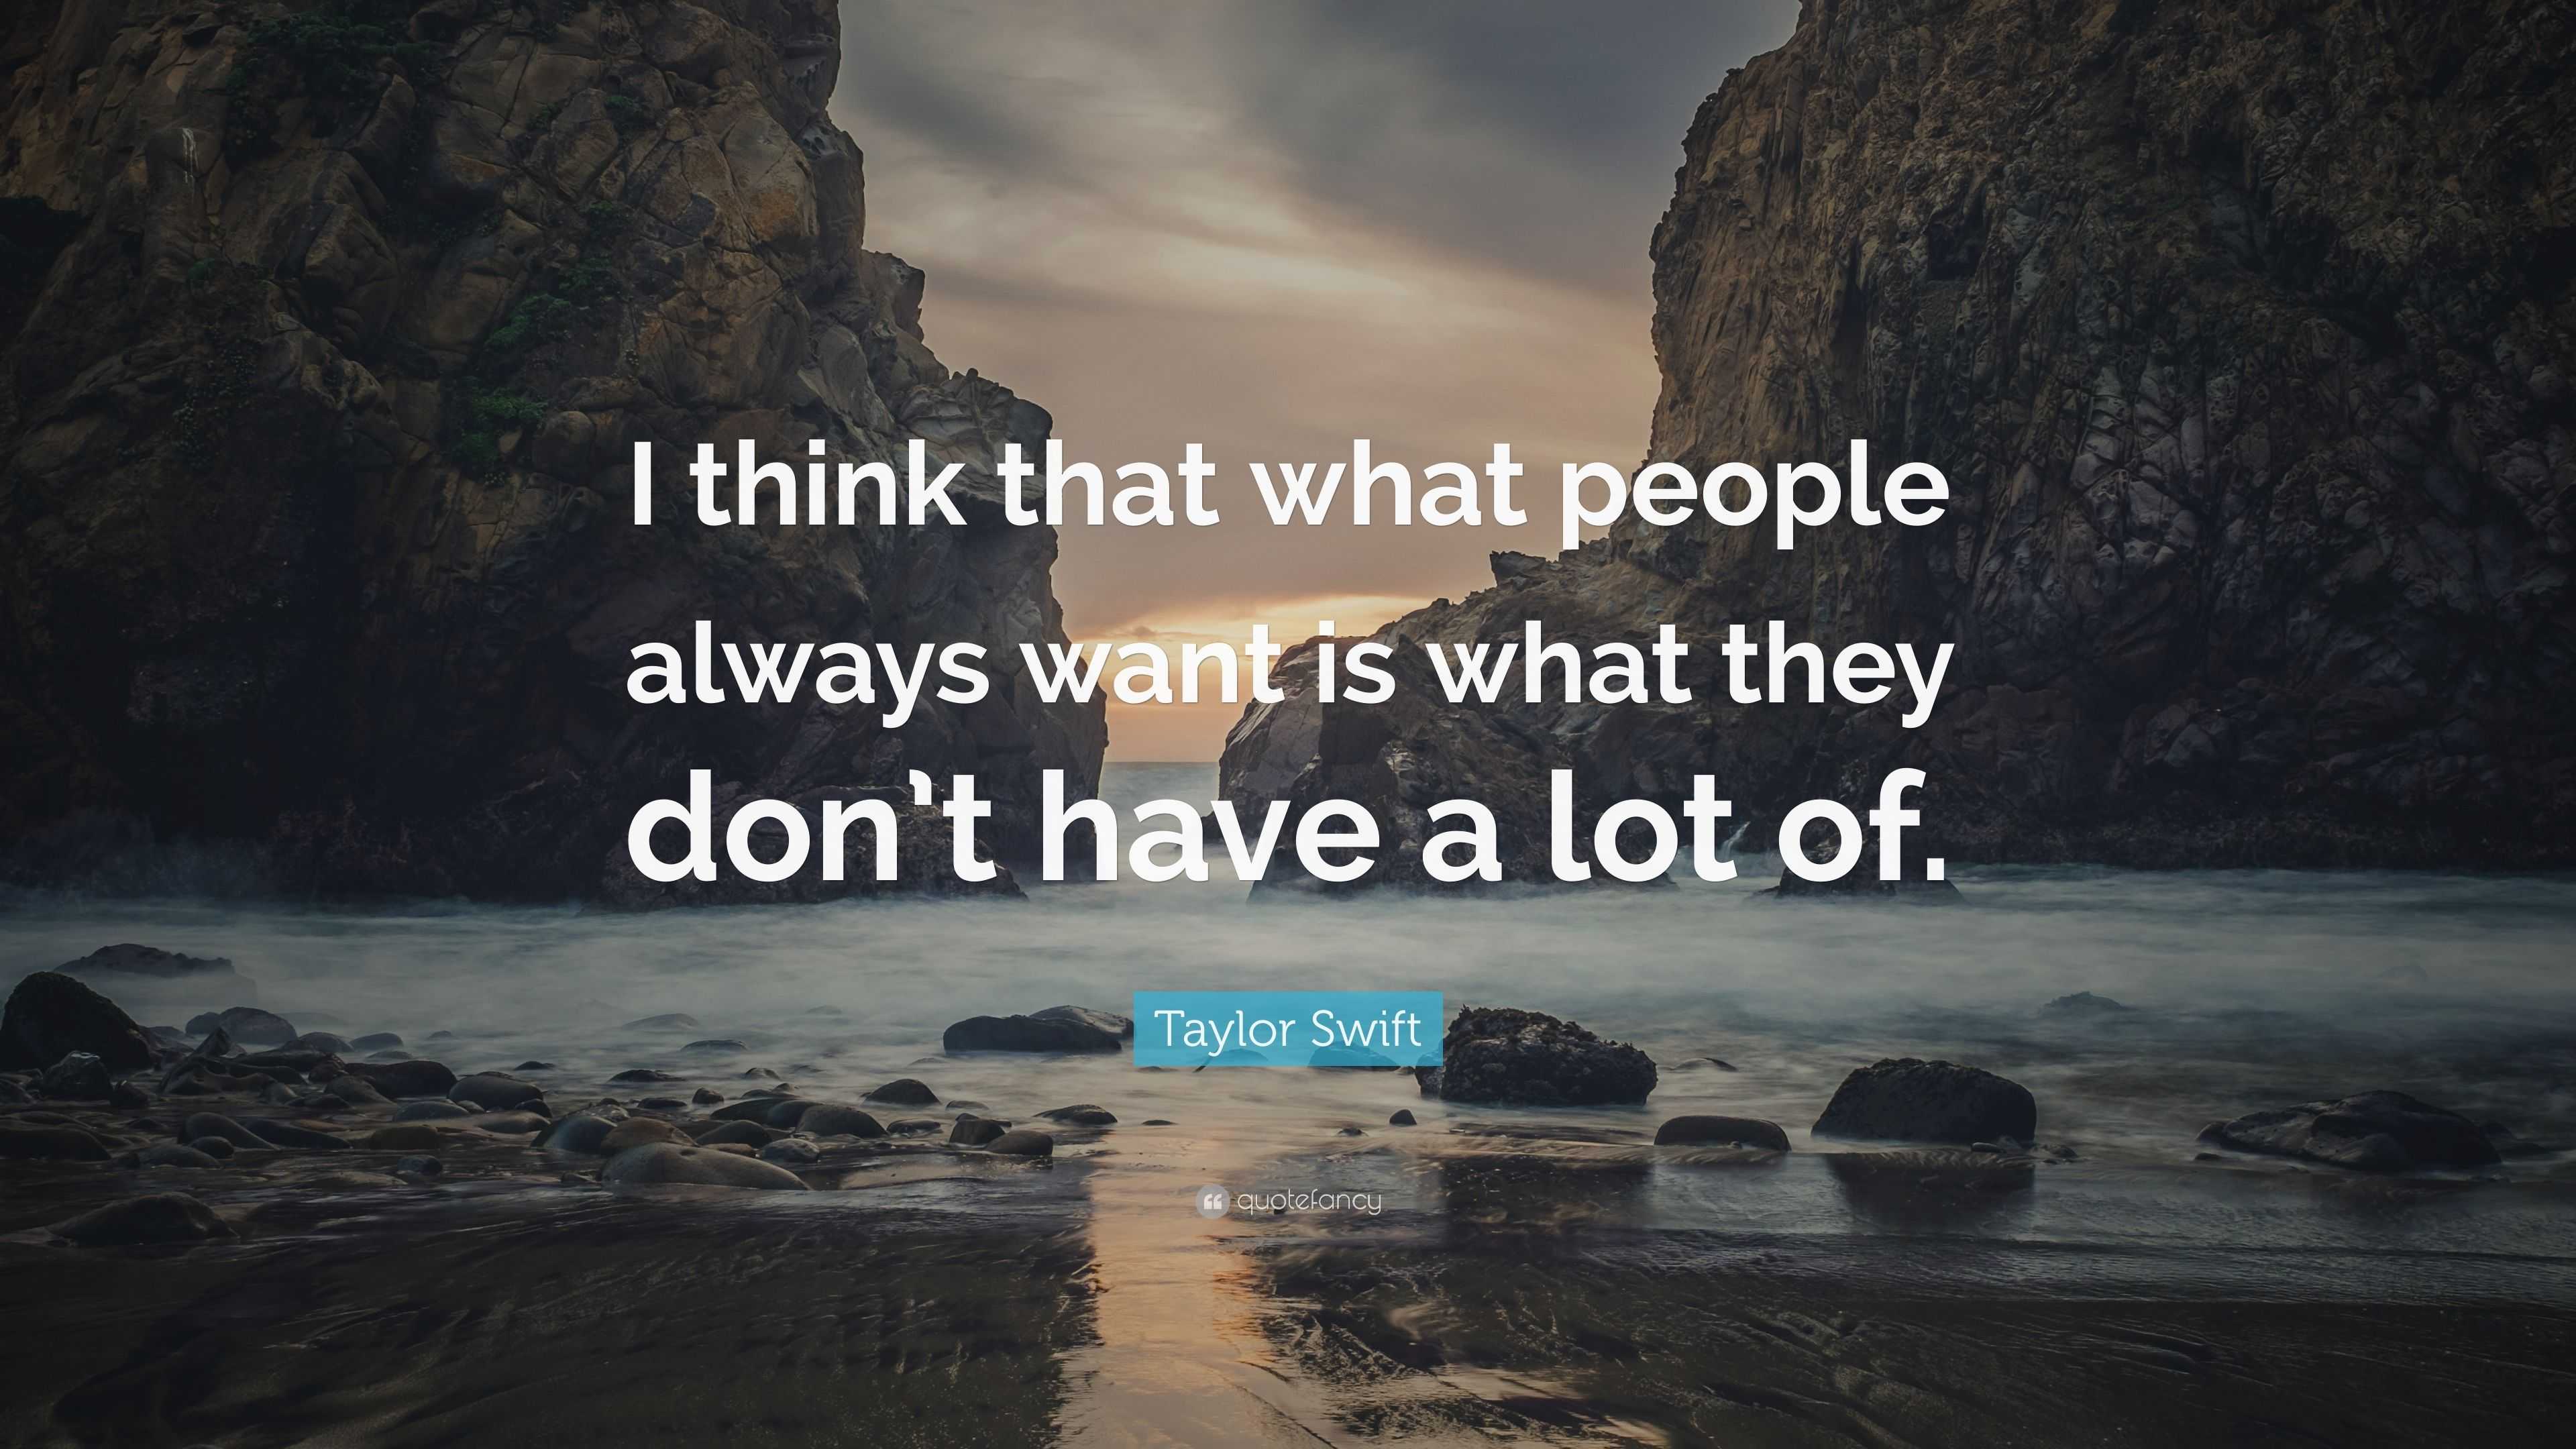 Taylor Swift Quote: “I think that what people always want is what they ...